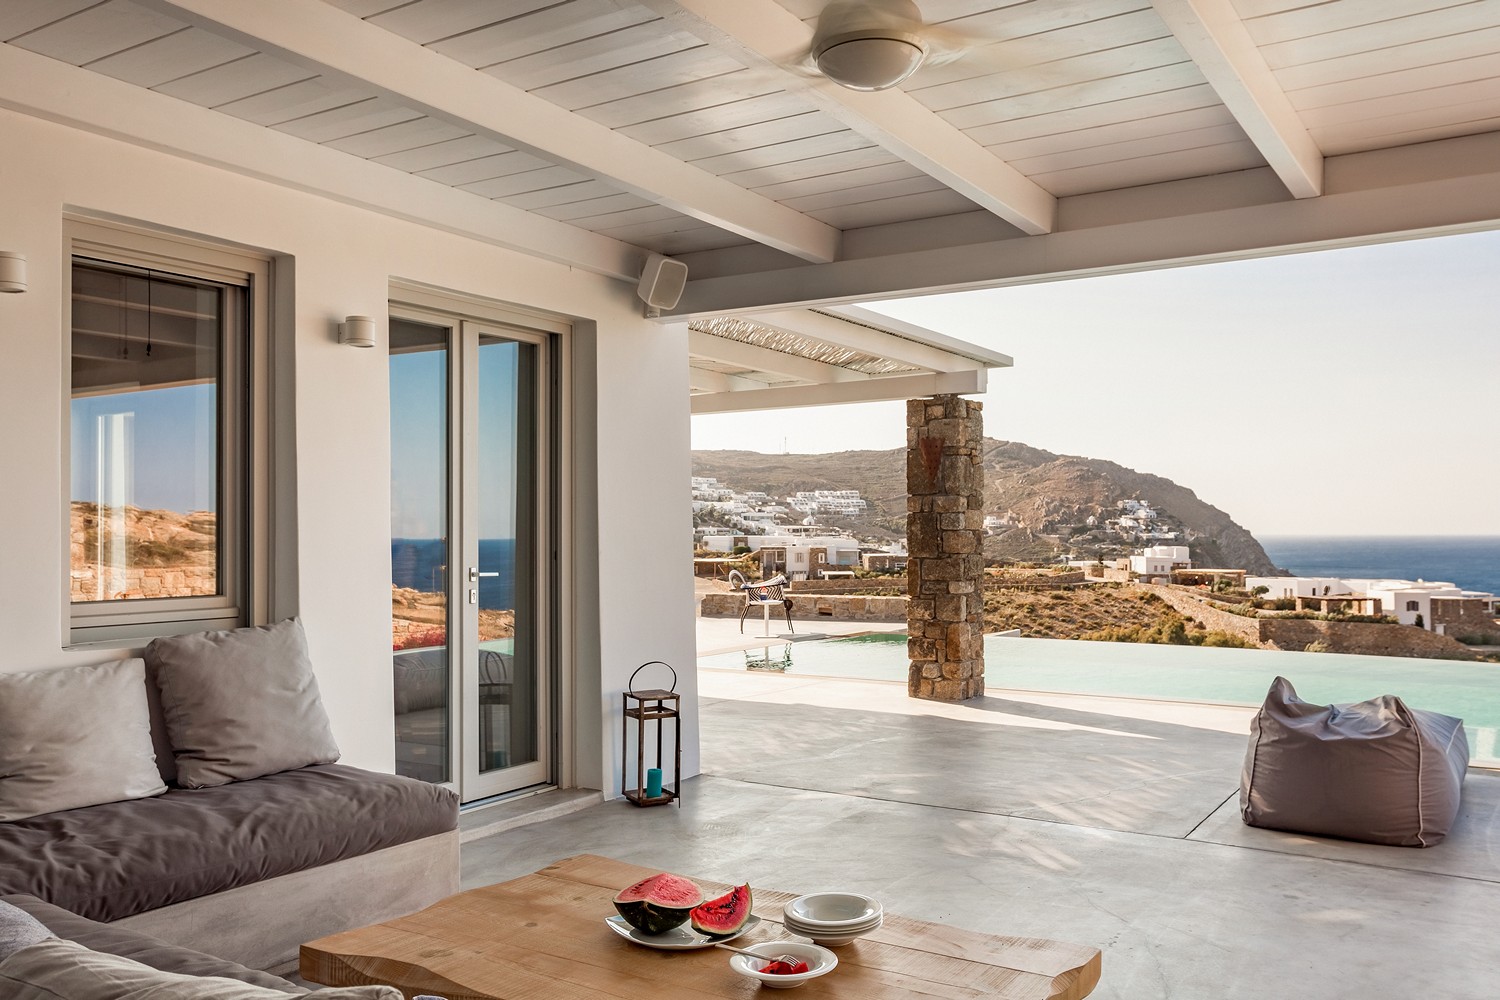 Find Out Why Mykonos Offers One of the Best Beach Vacations for ...